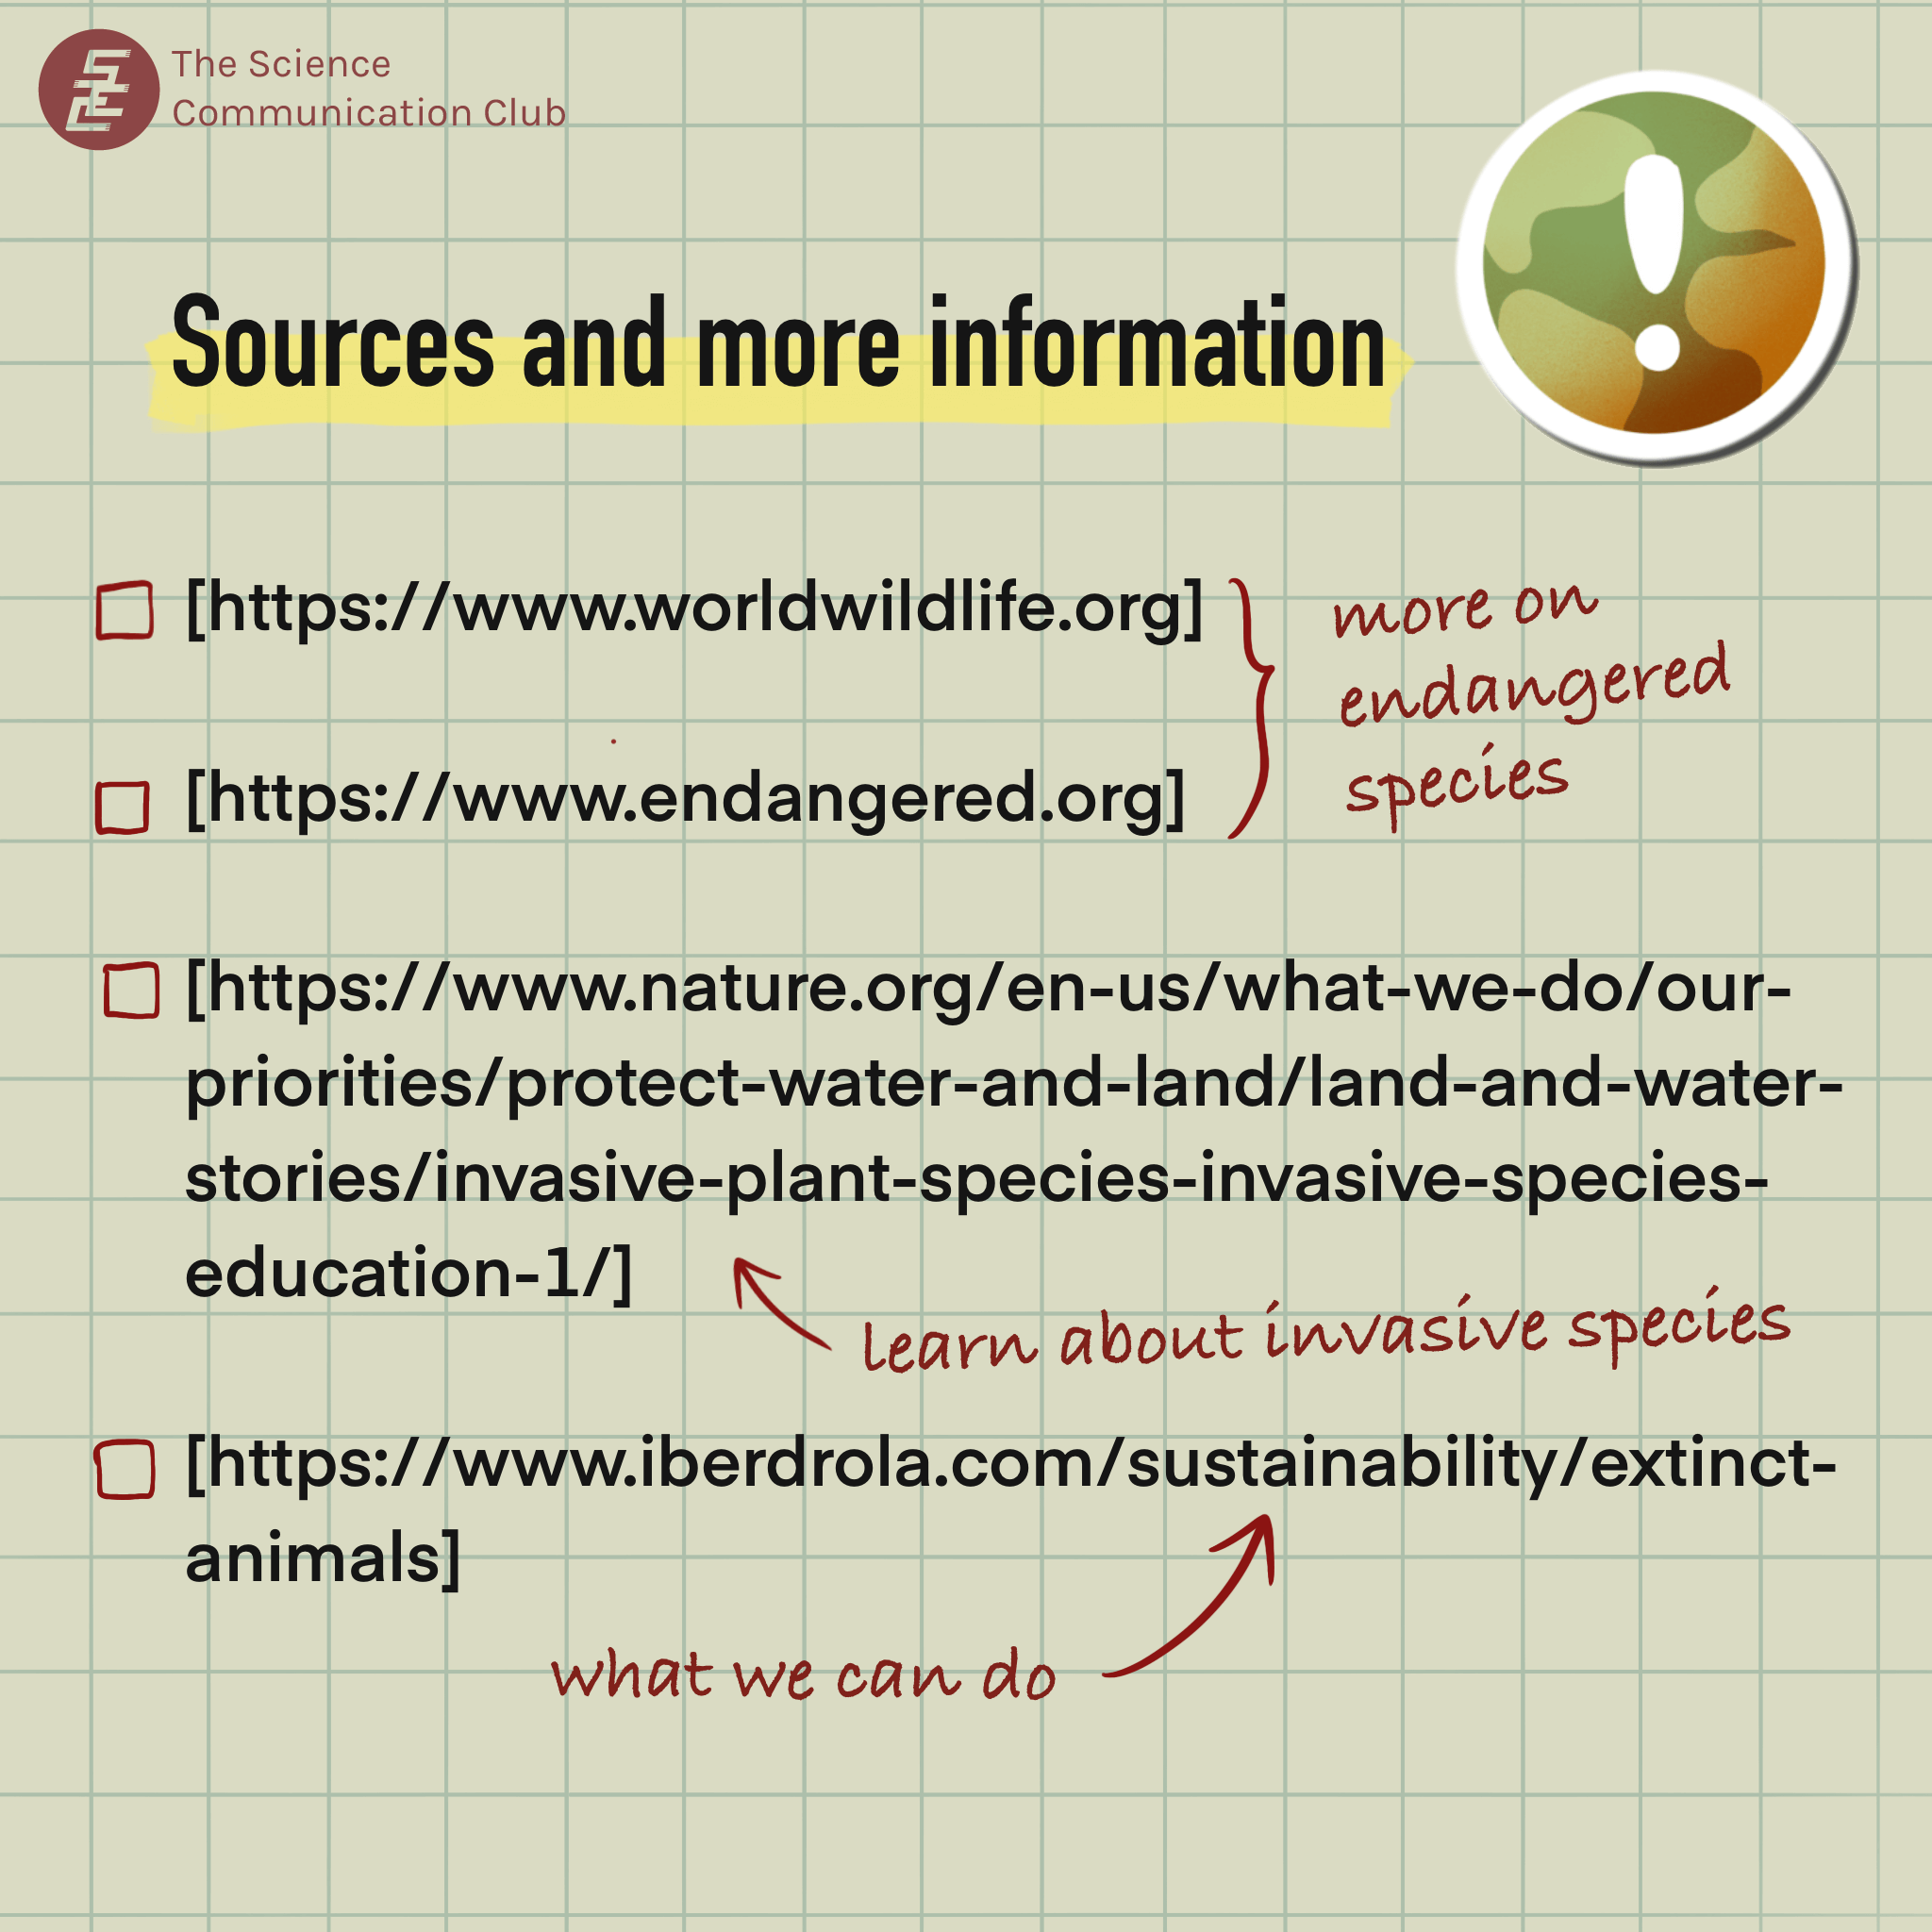 An image listing the sources for these infographics, including worldwildlife.org and endangered.org for information on endangered species, nature.org for invasive species, and iberdrola.com for what we can do to help these species.